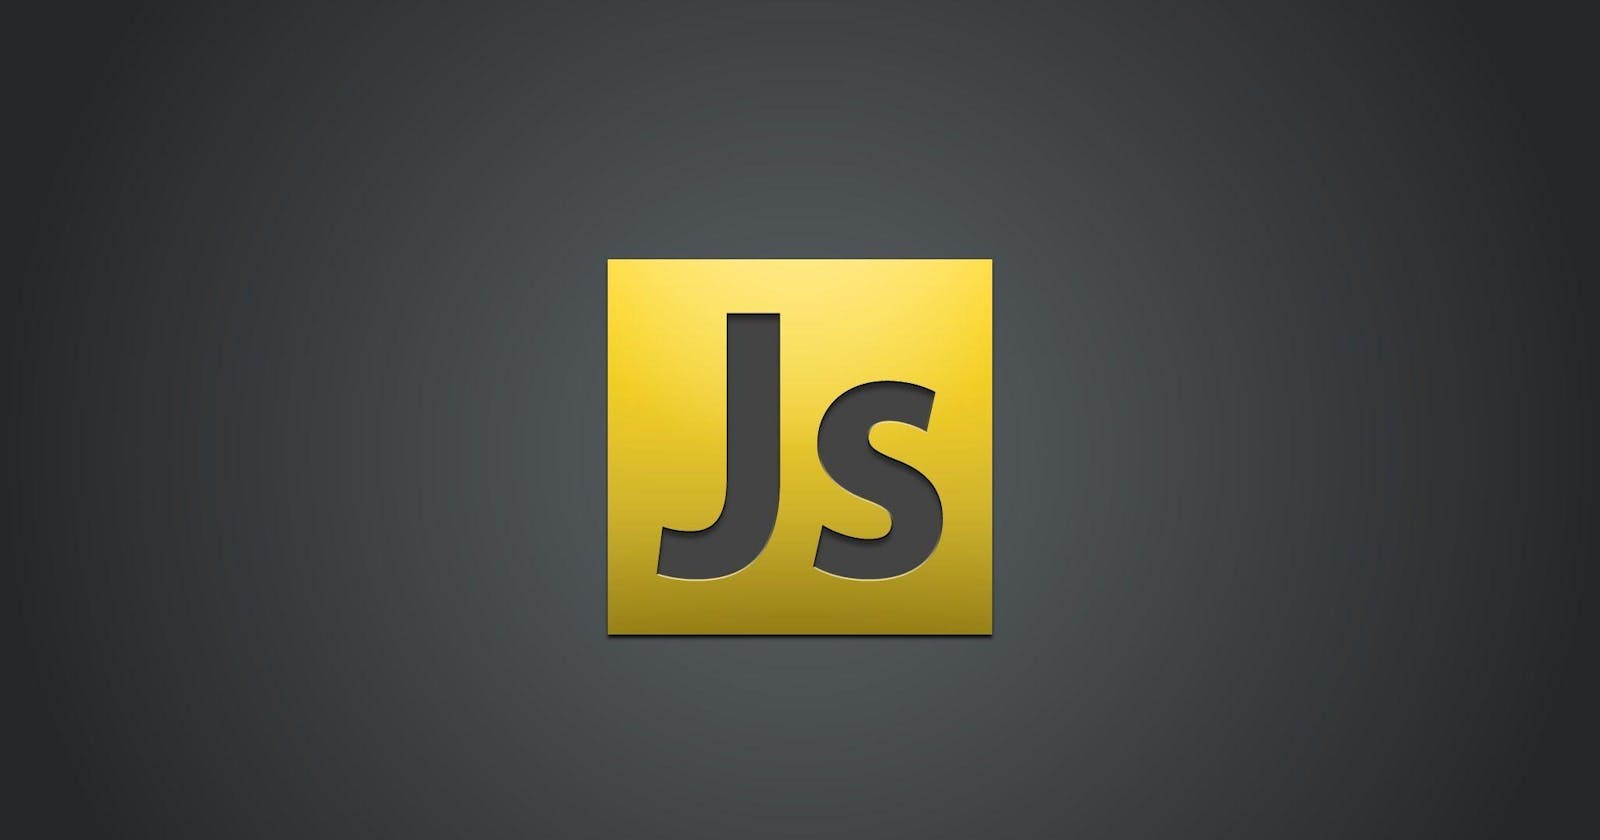 Top 10 hacks if you are a javascript develop